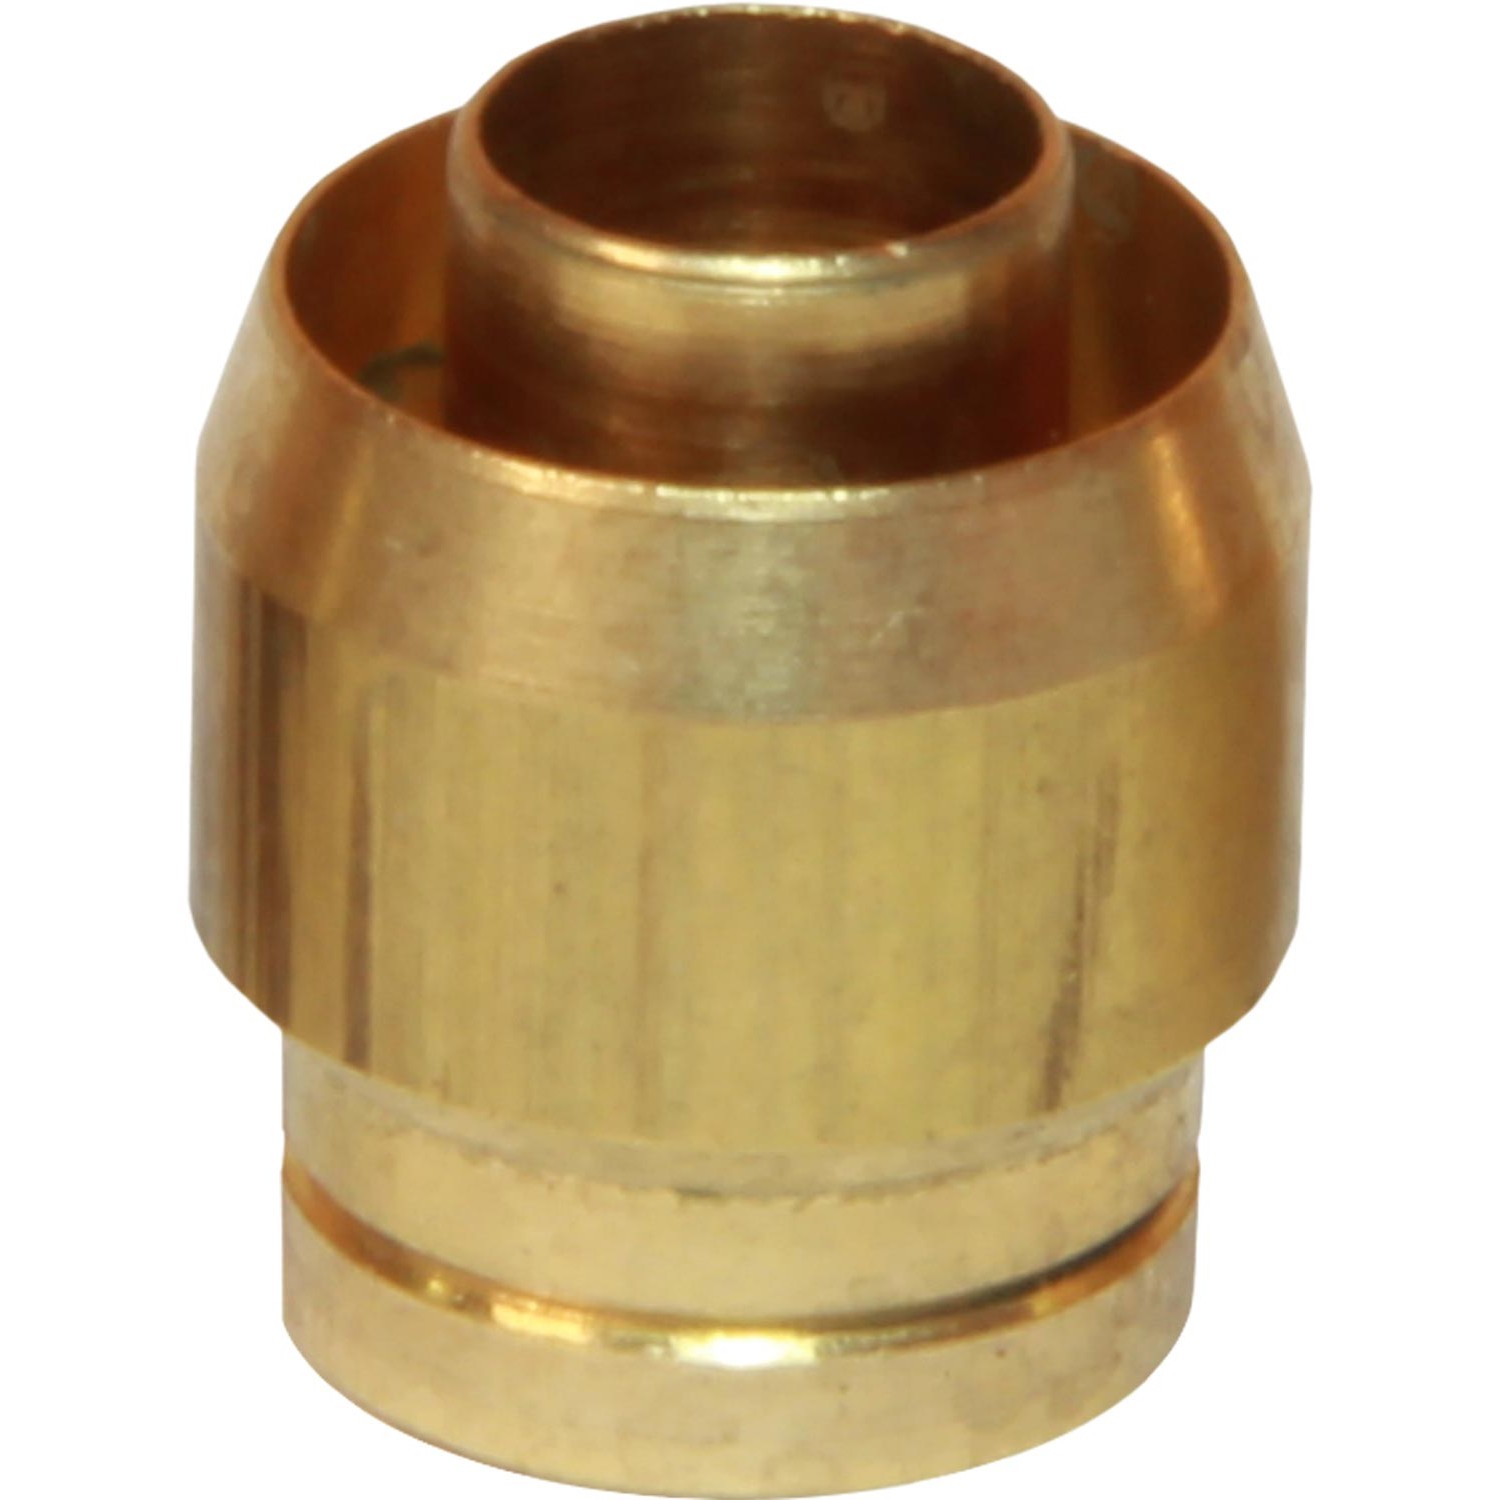 BARREL OLIVES METRIC BRASS 10MM PLUMBING COMPRESSION FUEL COPPER PIPE QTY 100